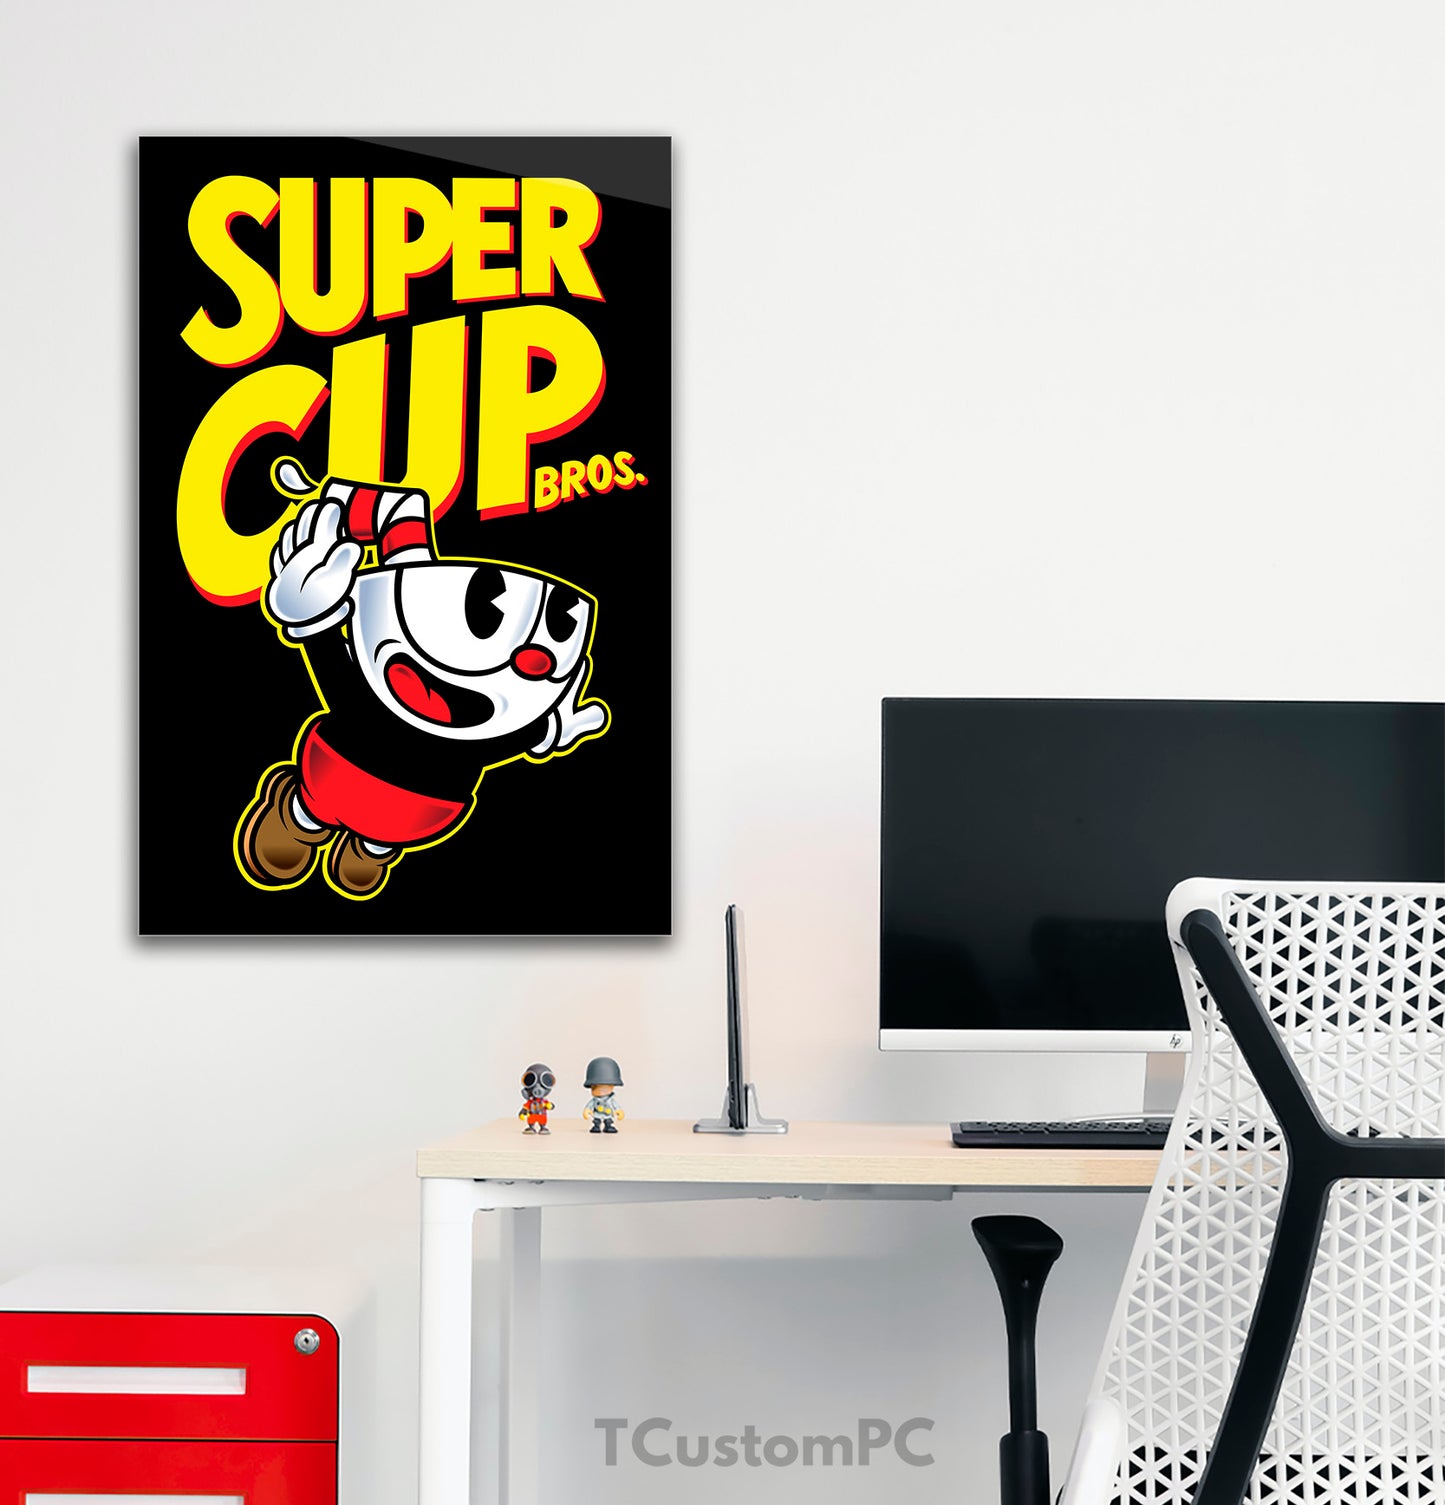 Super Cup Bros - Cuphead painting